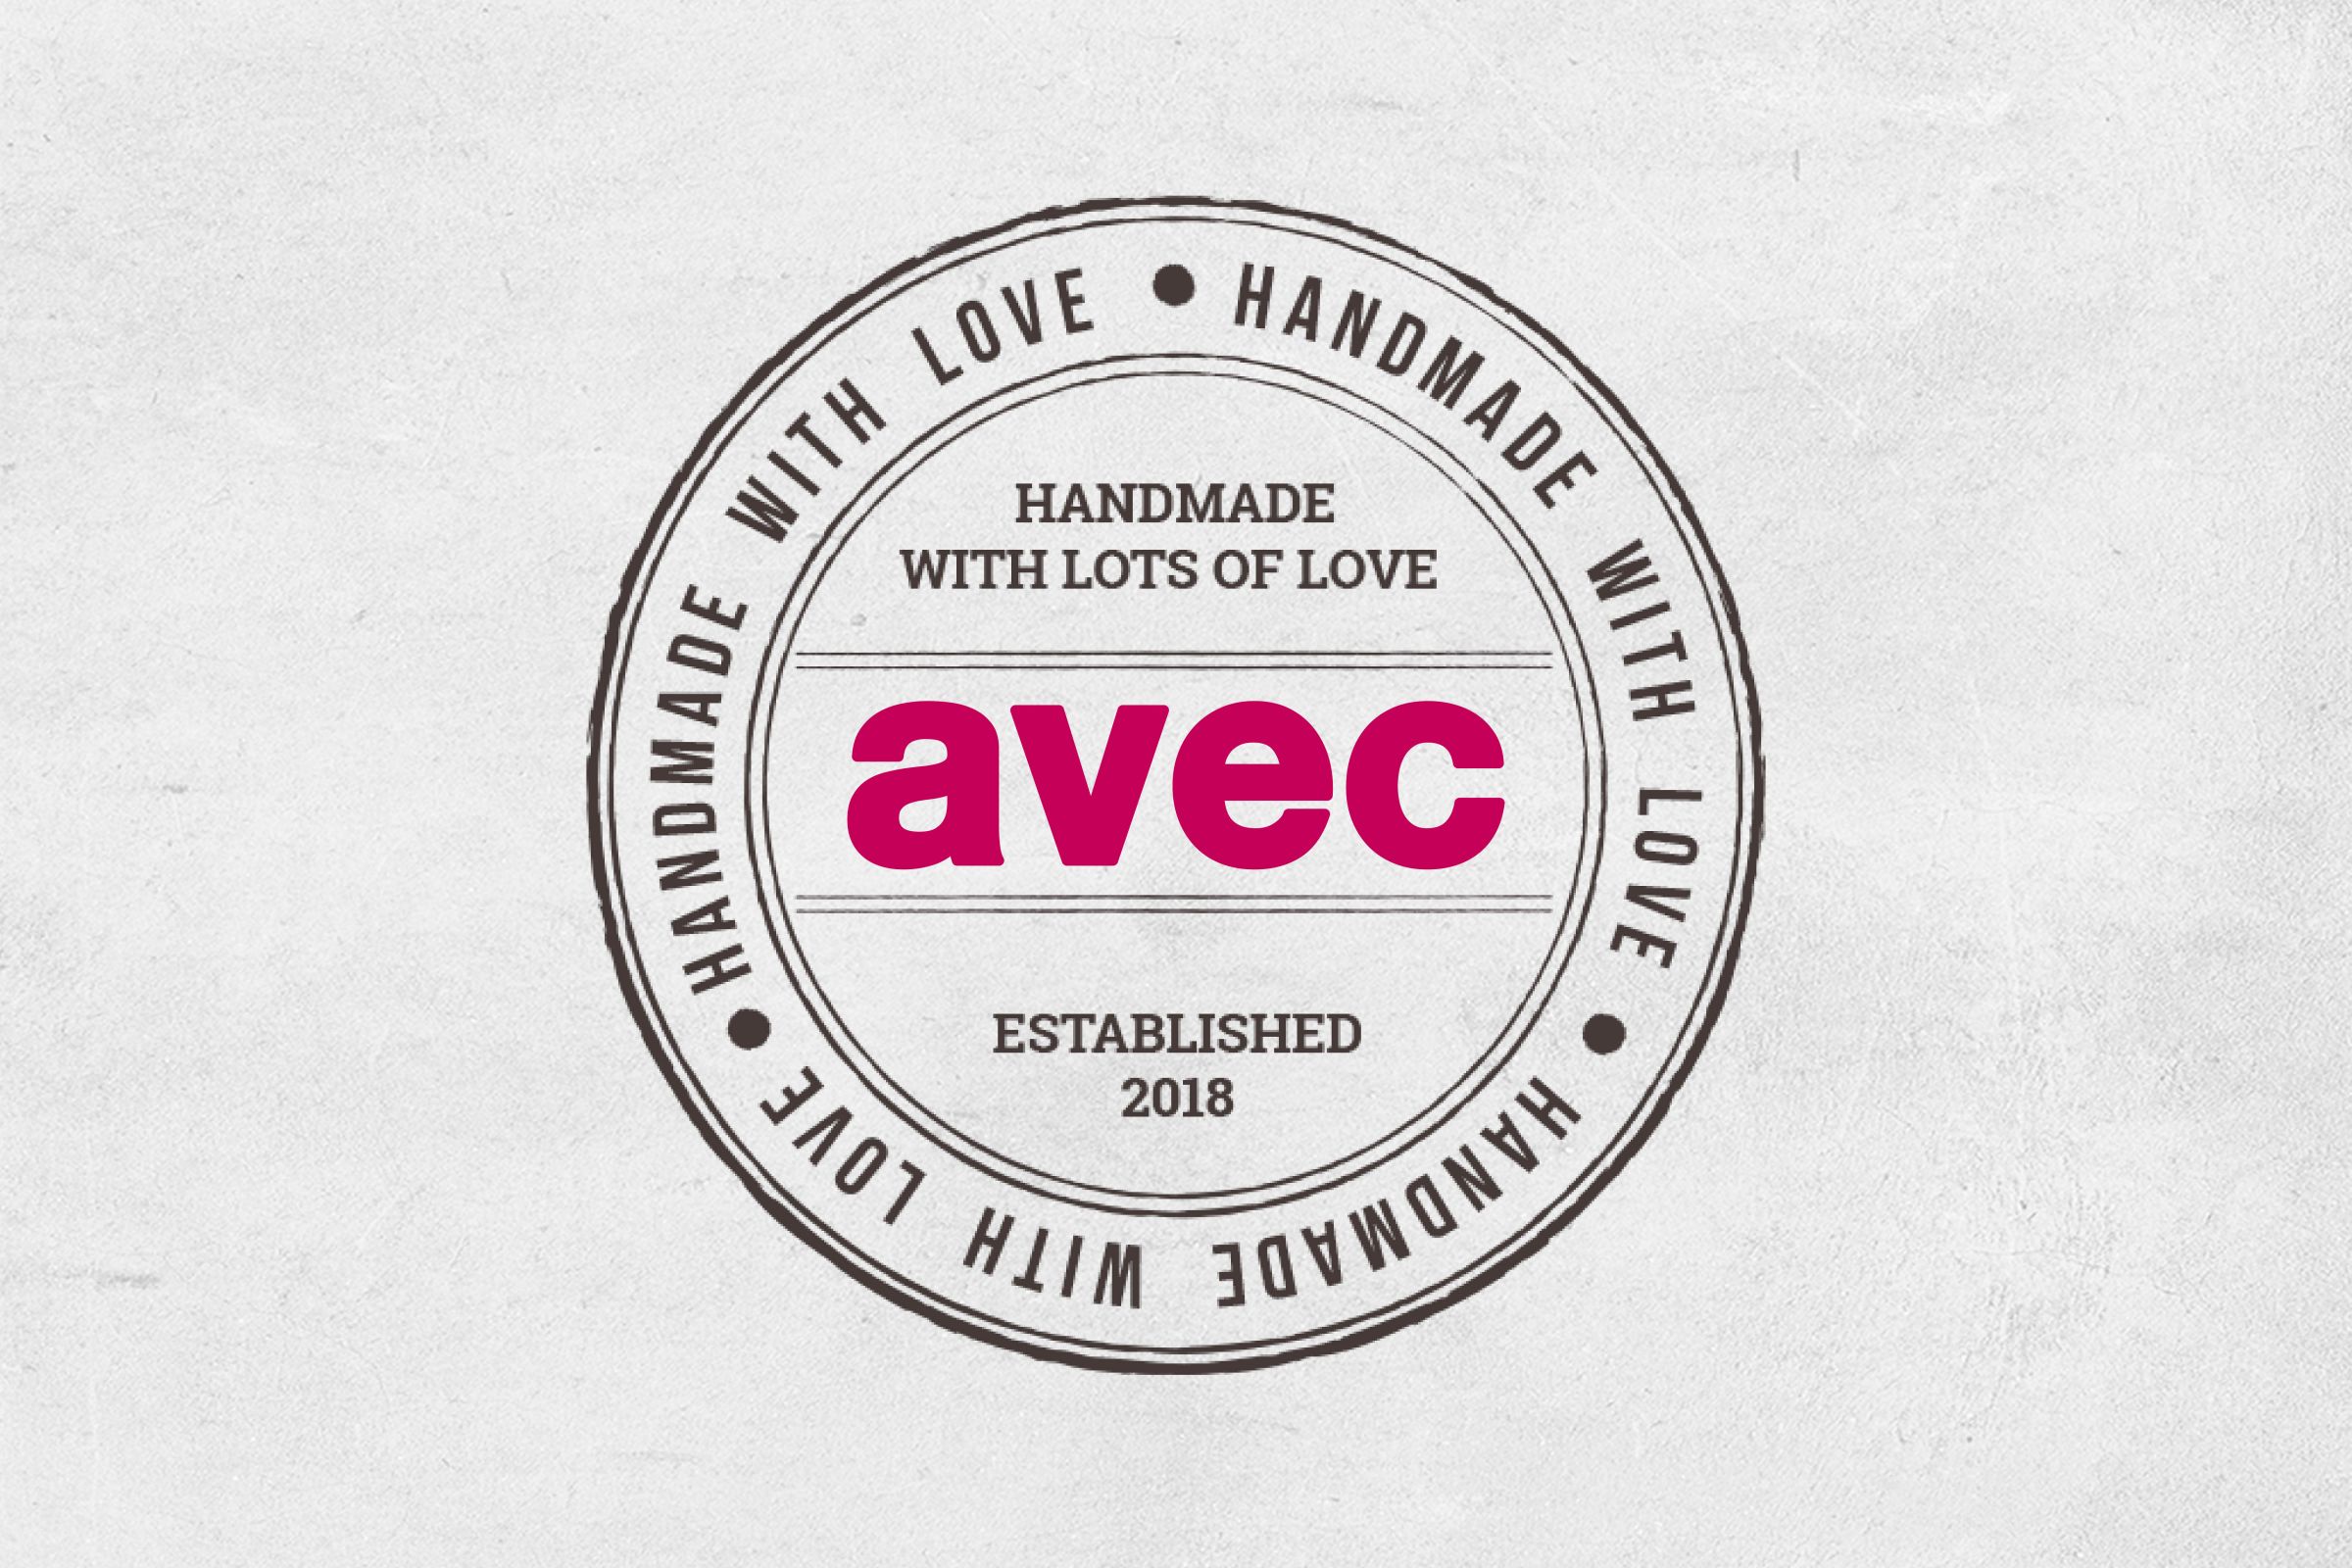 The goal of the rebranding was to simplify the original logo whilst maintaining strong recognition Additionally the second version of the logo reminding the stamp was created for all the handmade goods in the stores